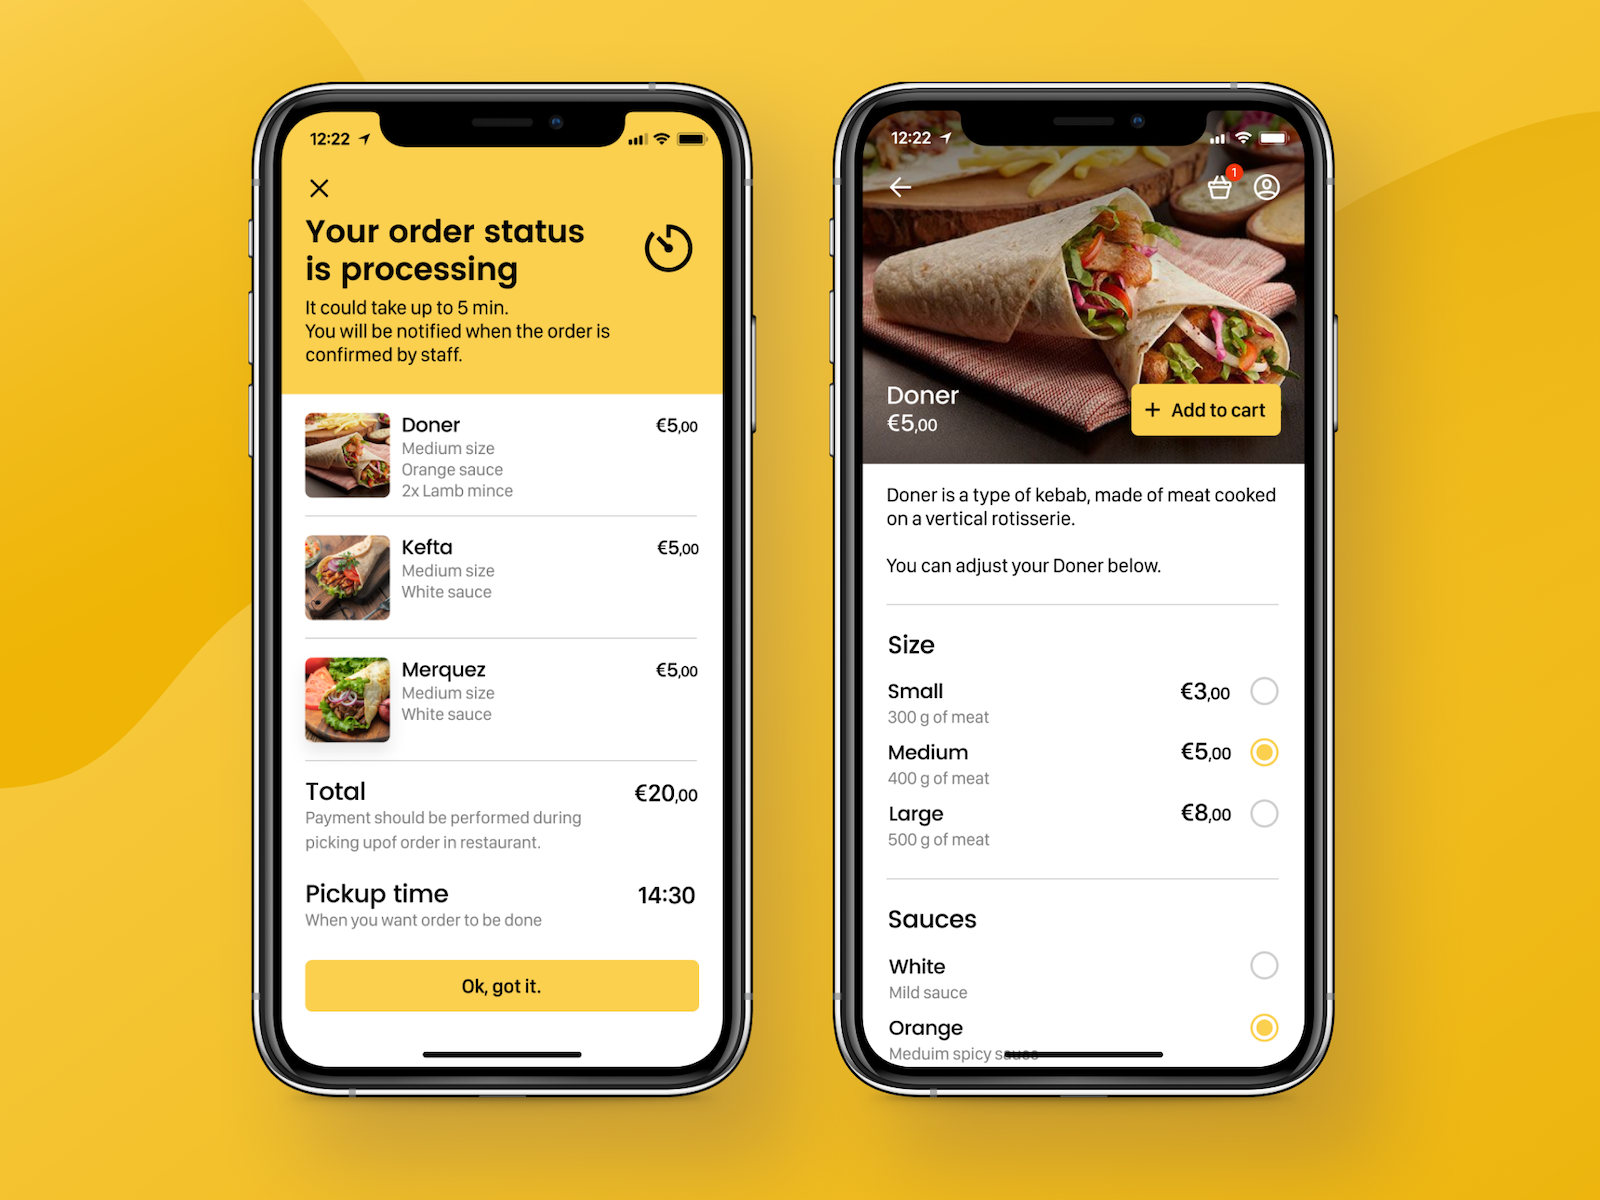 Food Ordering App - Order Summary and Product Screens by Dima Miro on